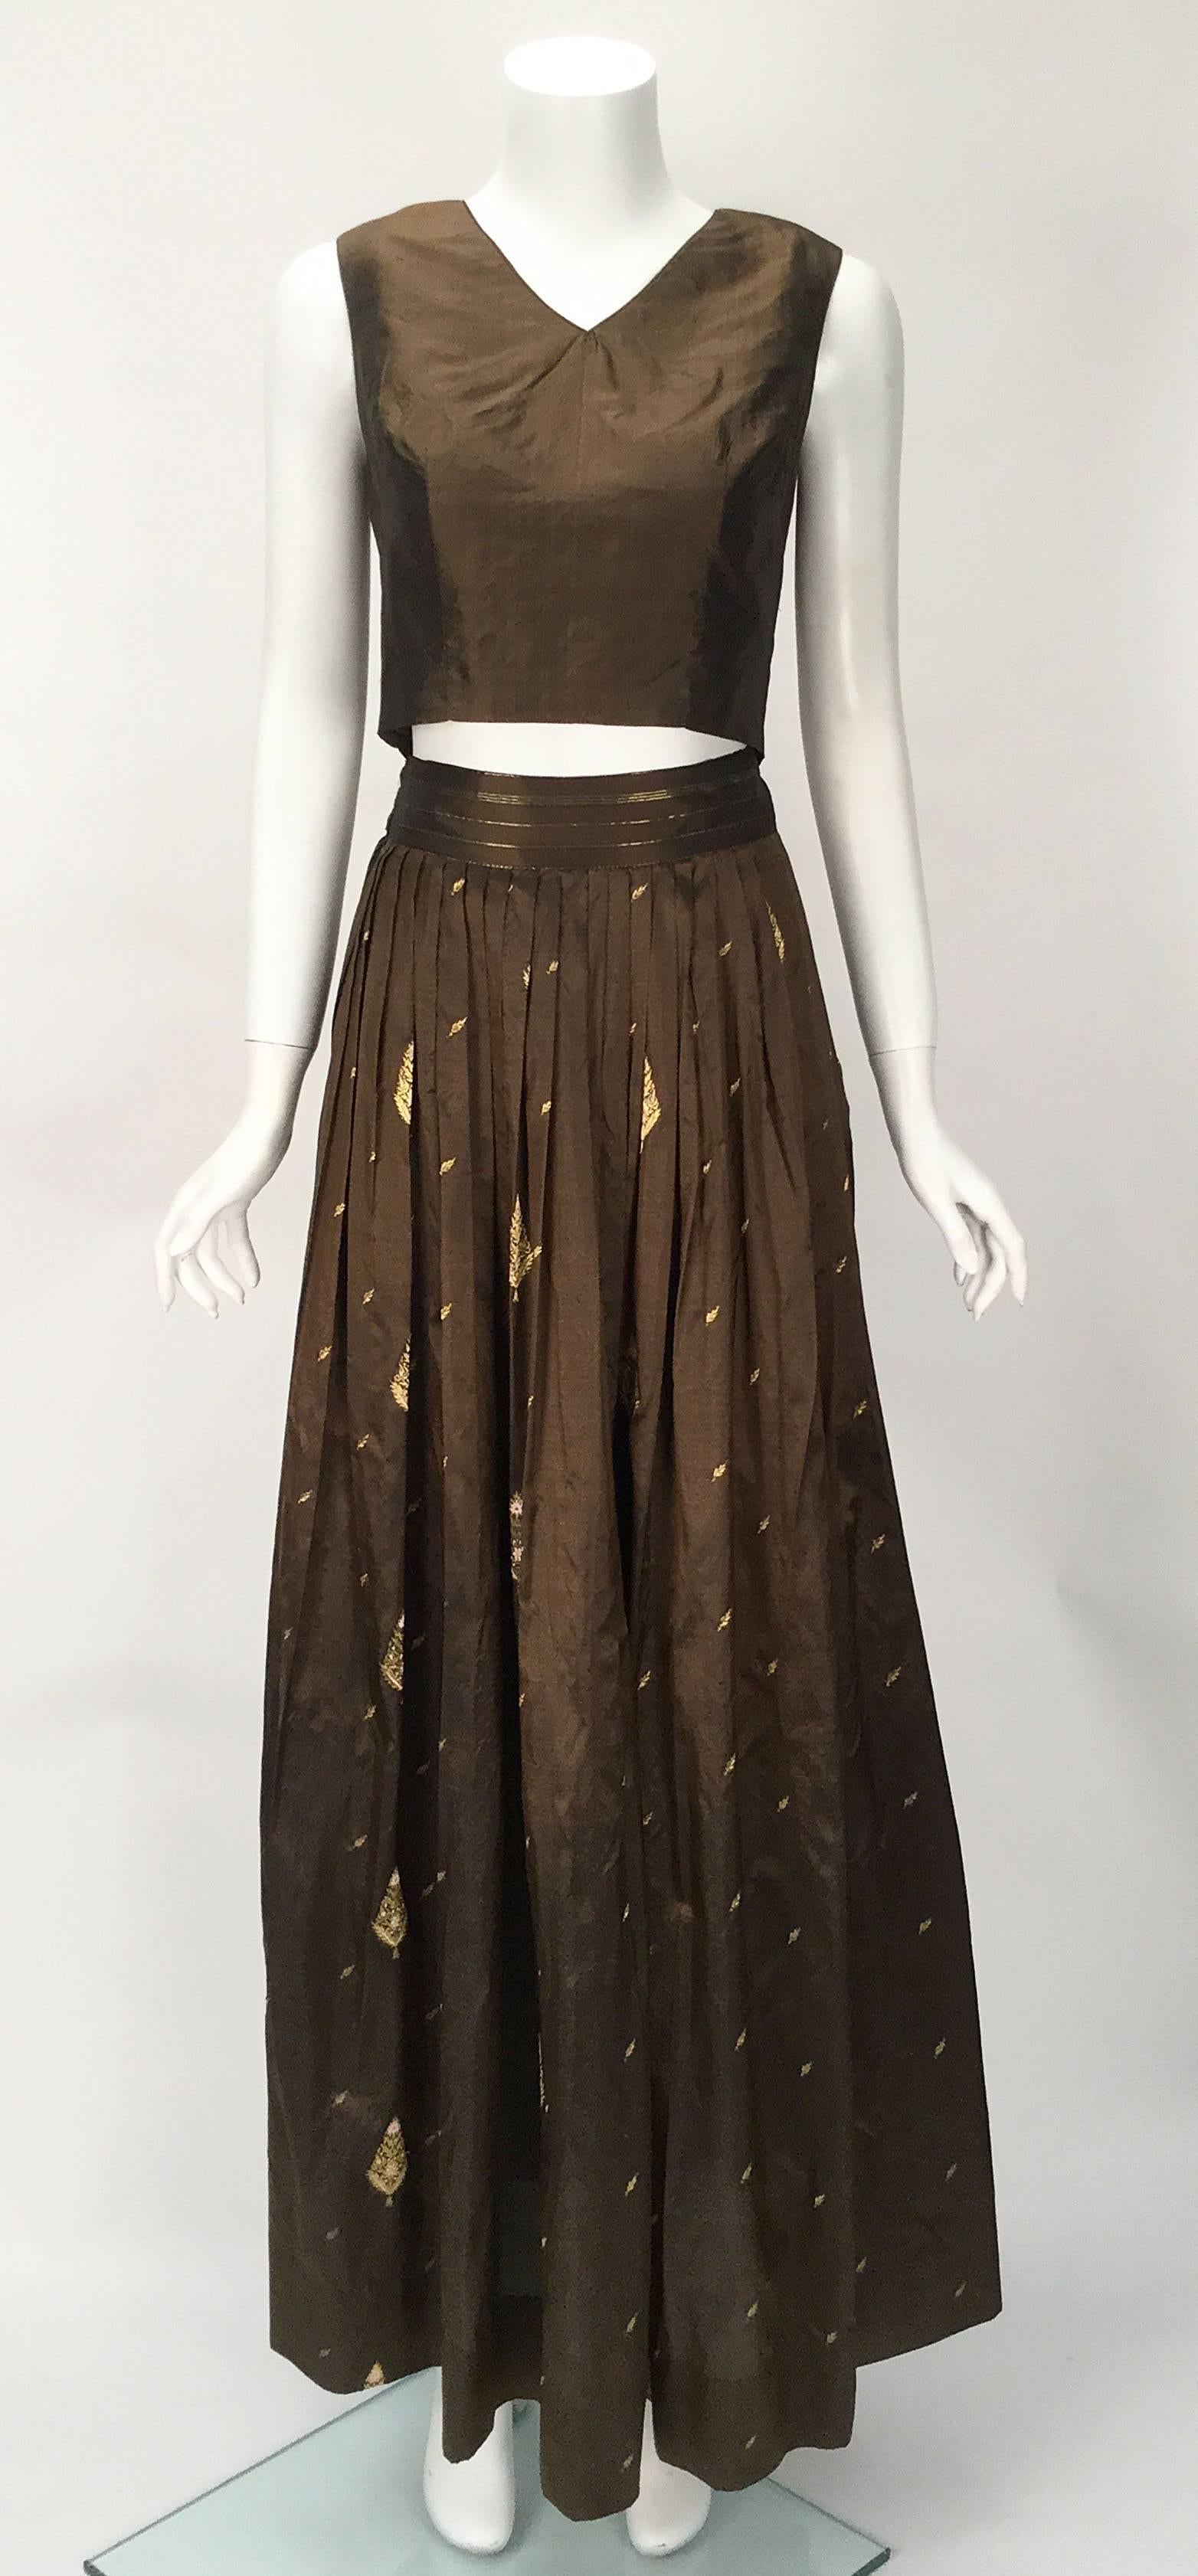 Spectacular three piece brown evening ensemble with metallic embroidery. Ethnic inspiration behind this beauty!  Amazingly versatile as you can wear it as an ensemble or wear each piece individually paired with staple pieces you own. Dress it down